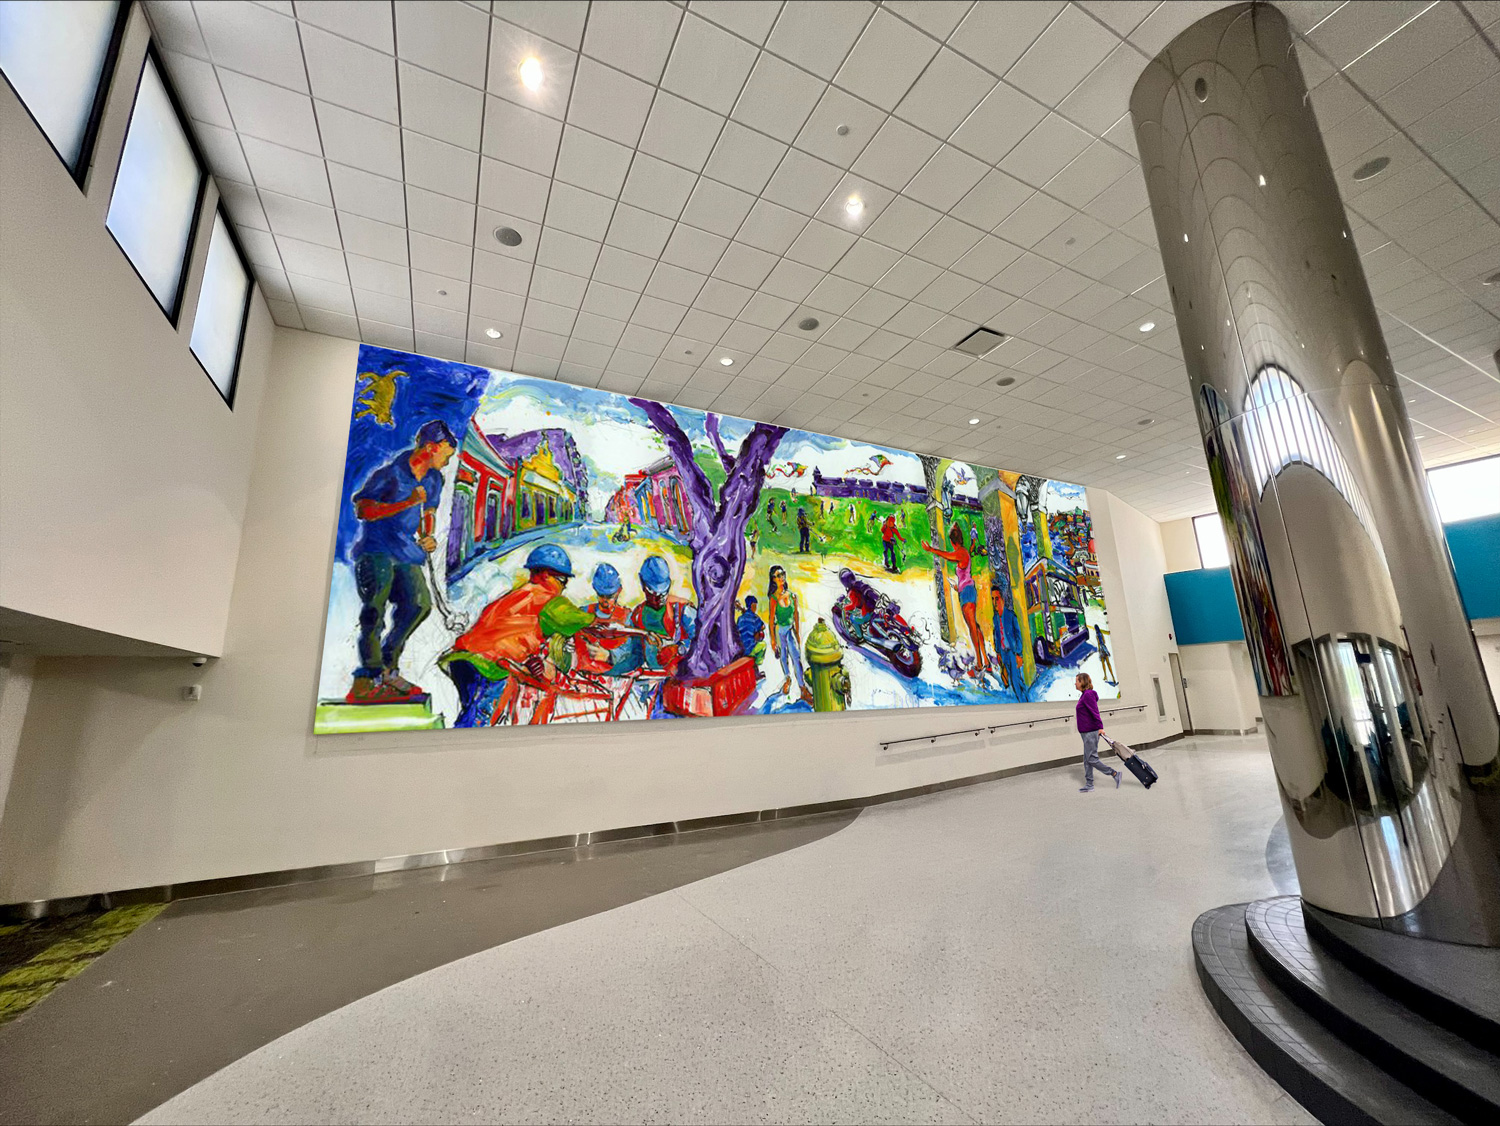 Mural in the lobby of the Puerto Rico International Airport